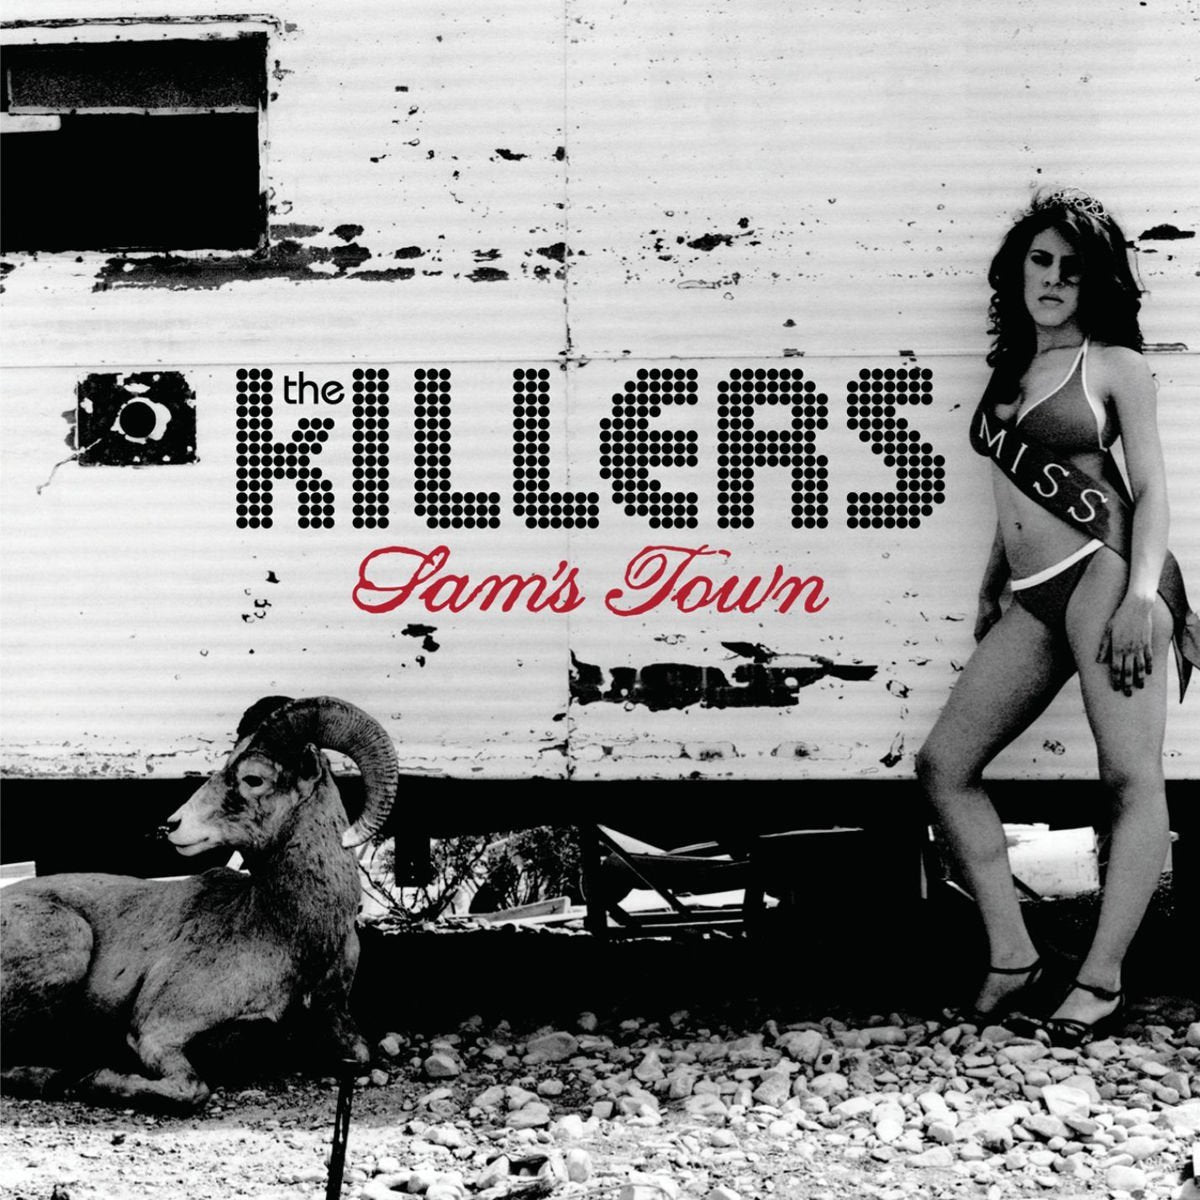 We Saw The Killers Perform Sam's Town To Celebrate It's 10th Anniversary